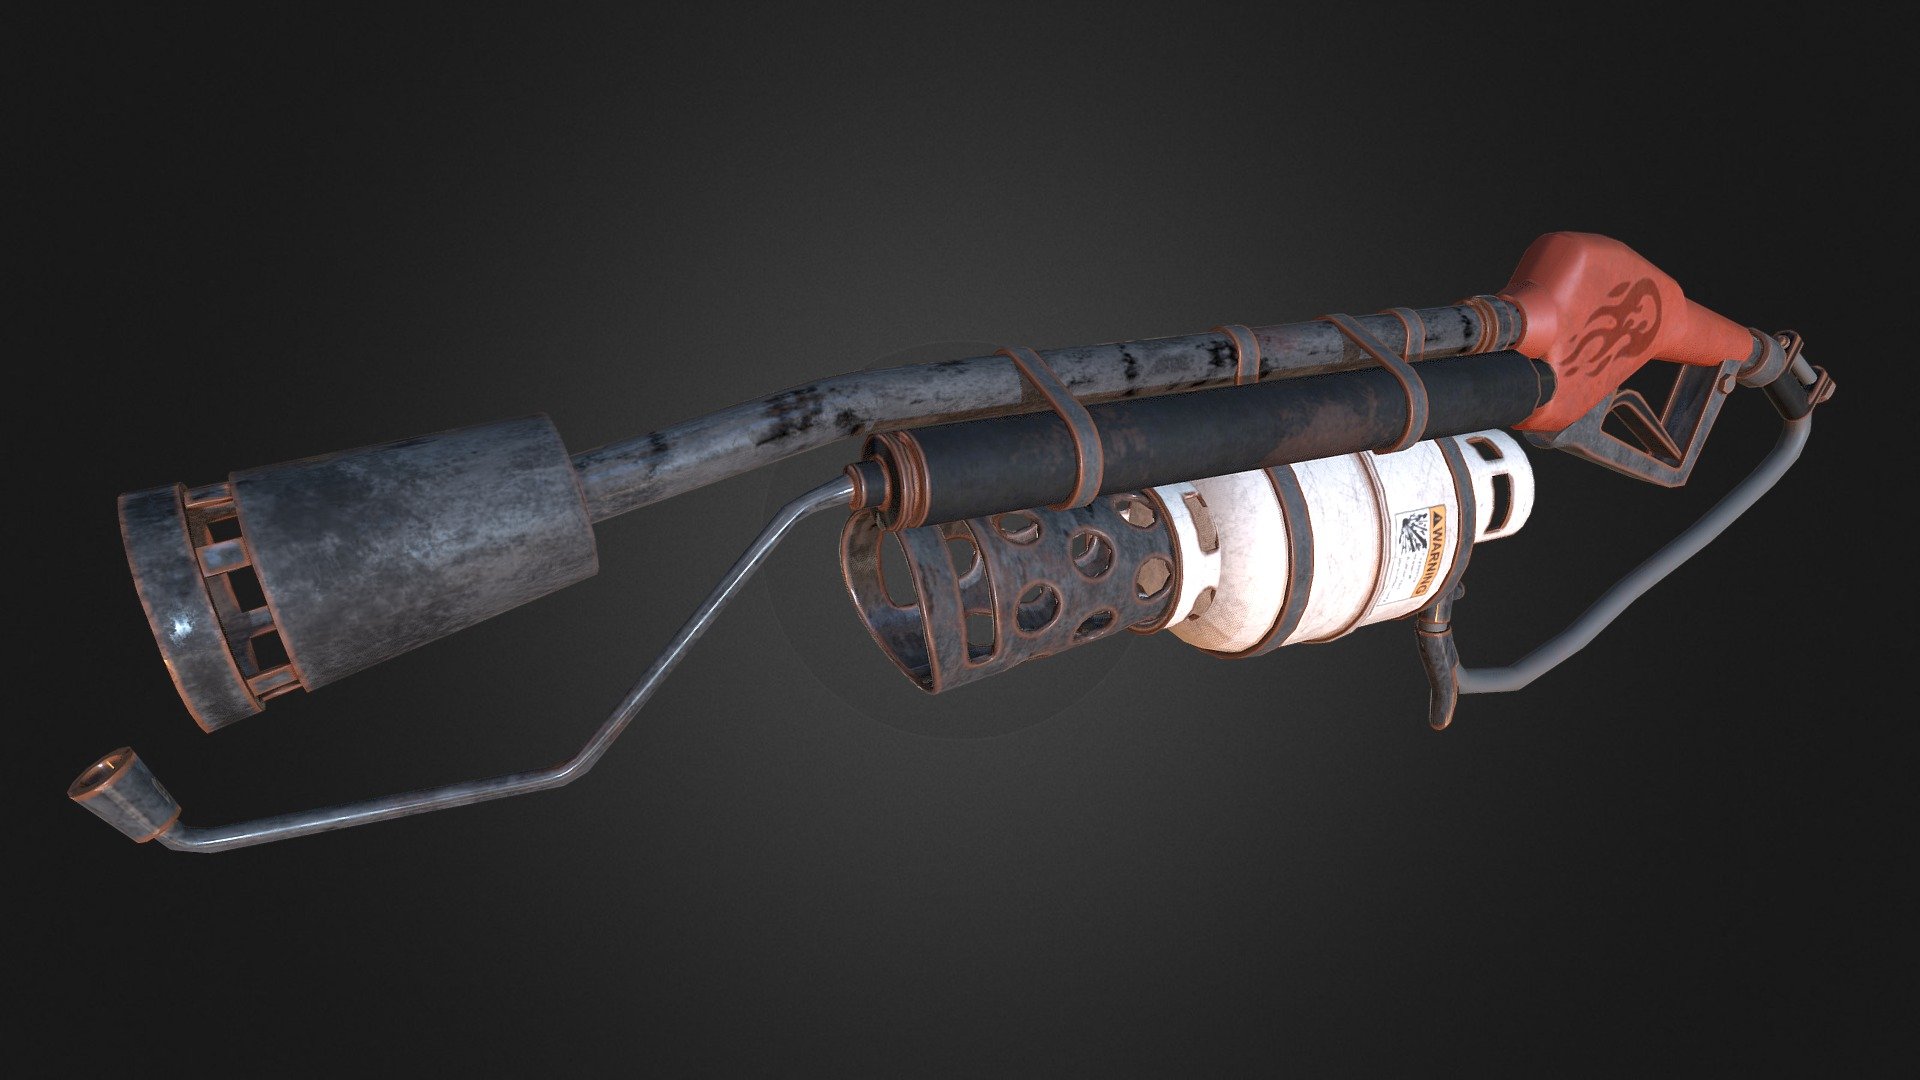 Flame Thrower Team Fortress 2 Download Free 3d Model By Arminalcapon Arminalcapon F672dd4